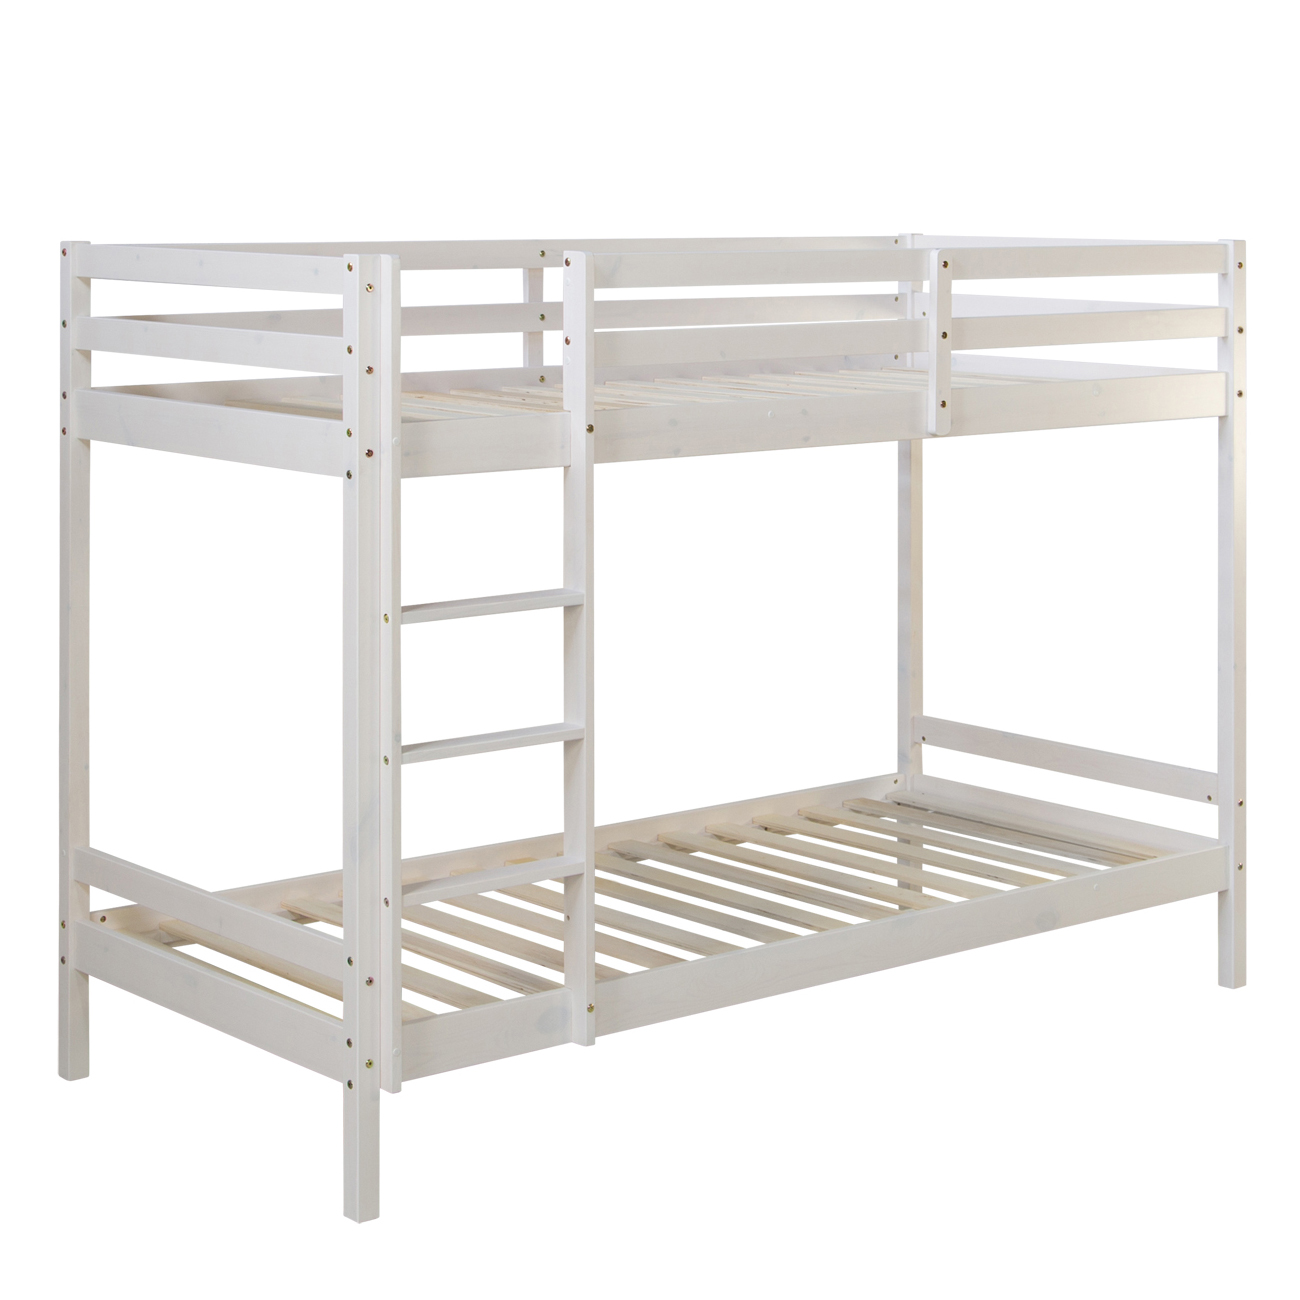 Bunk bed with 2 matresses Children bed 90x200 cm wooden Kids bed High sleeper White Slats